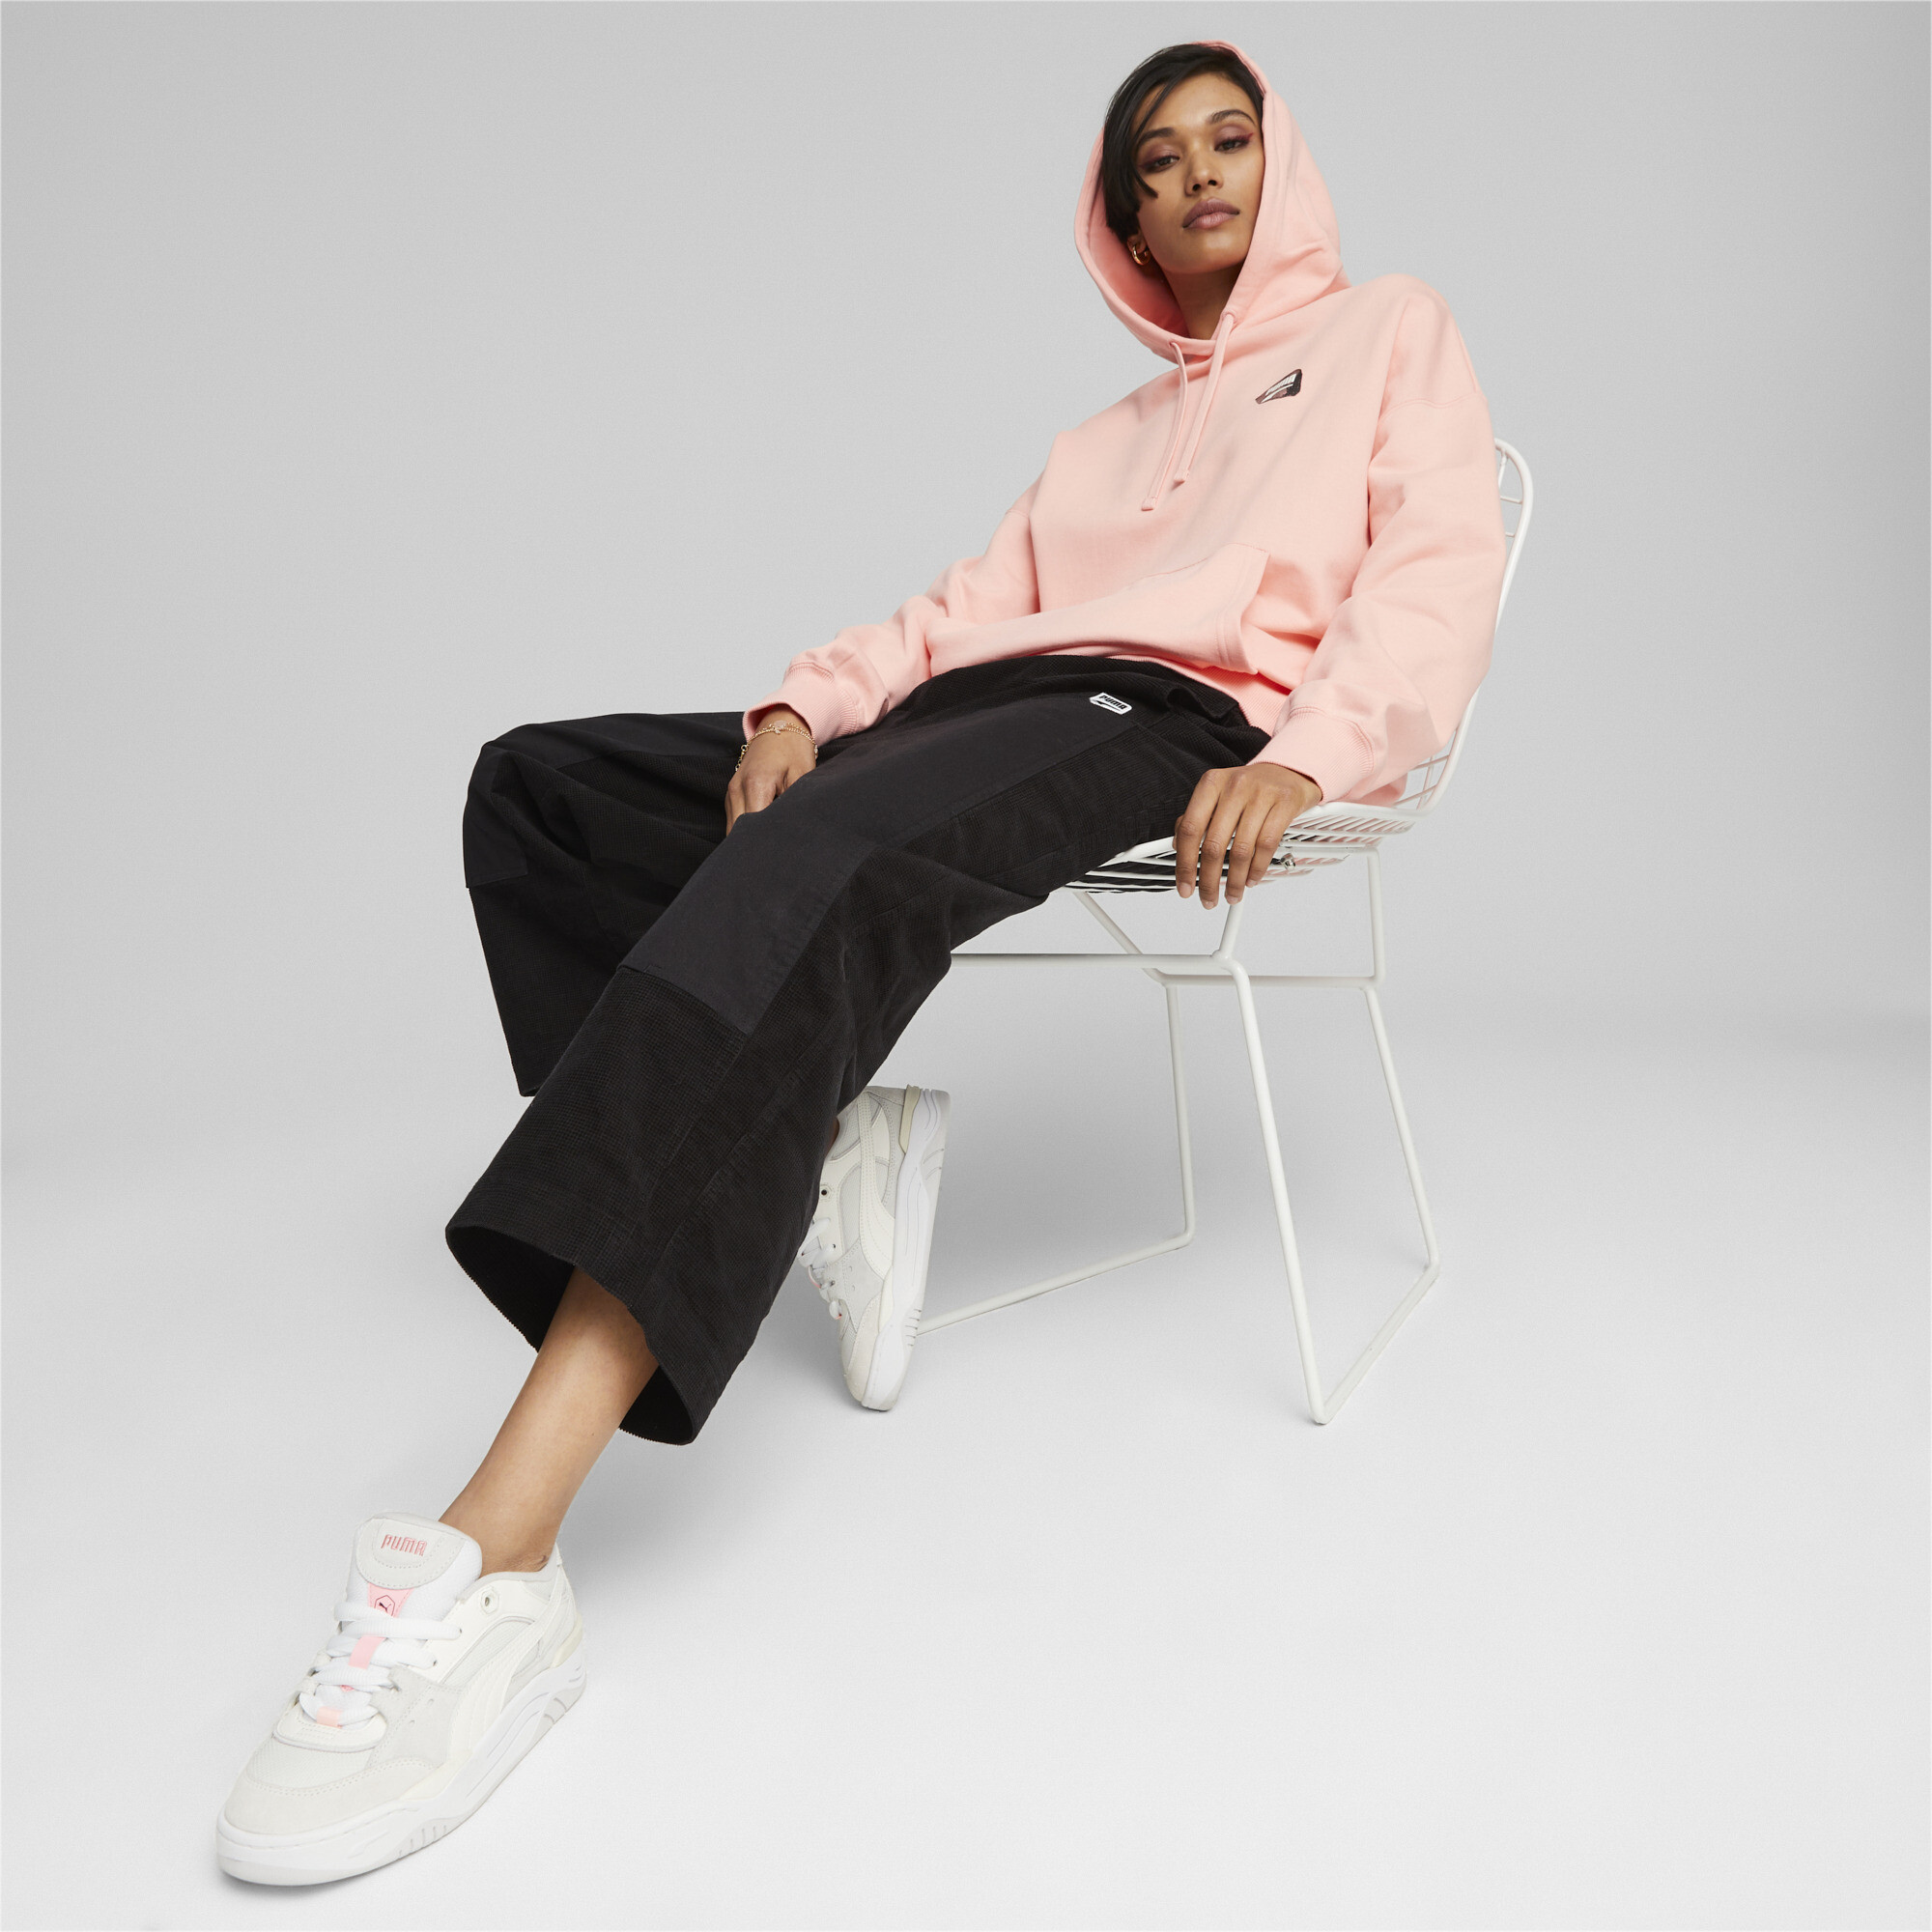 Women's PUMA DOWNTOWN Oversized Graphic Hoodie In Pink, Size 2X-Small